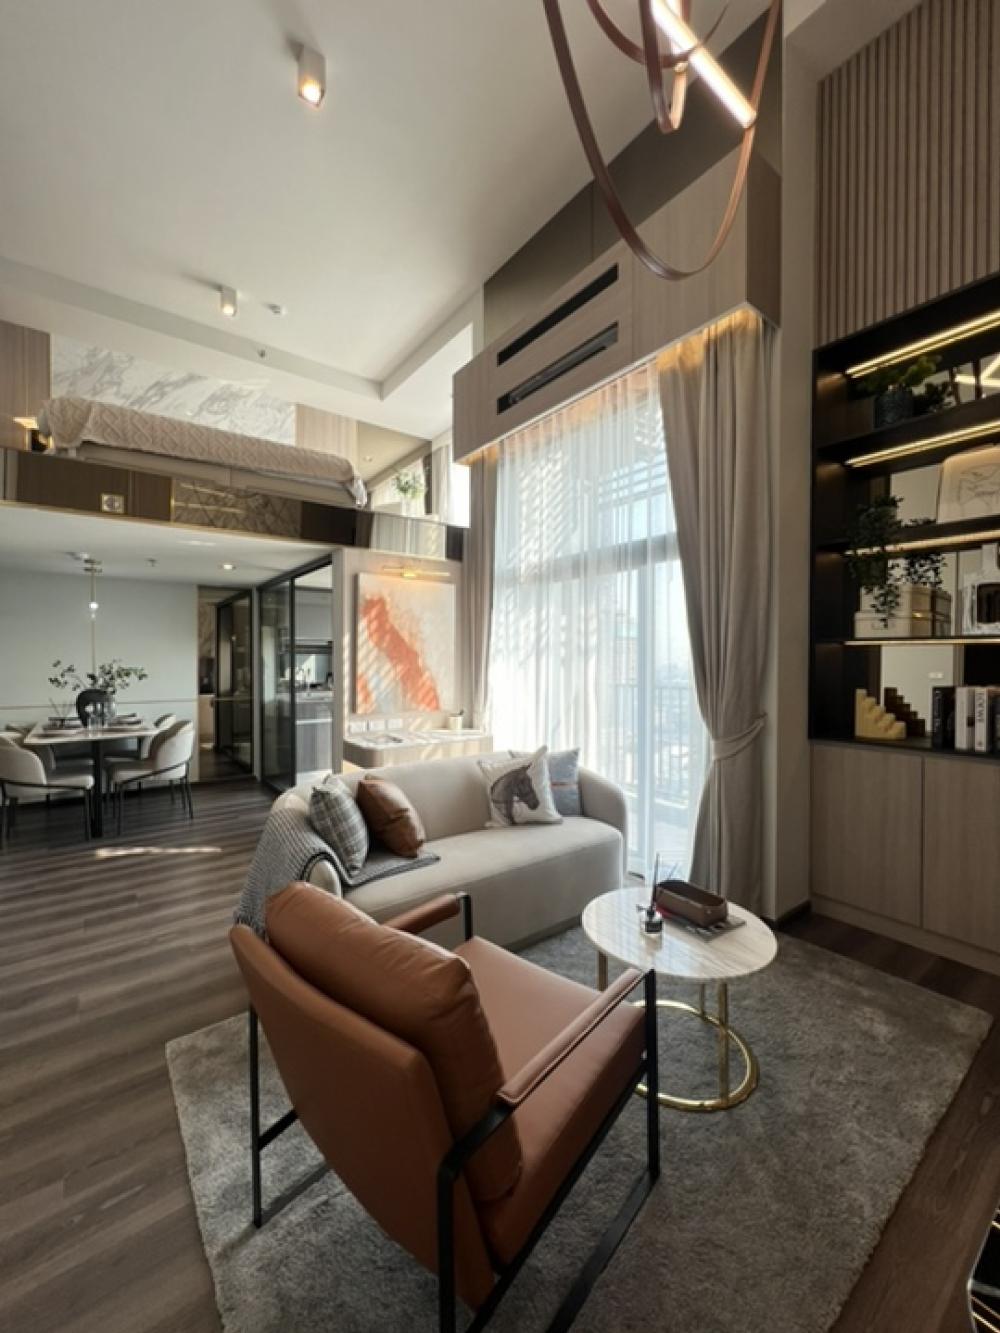 For SaleCondoRama9, Petchburi, RCA : Beautifully decorated room, ready to move in, first hand from the project, 2 bedrooms, 78.37 sq m. Condo Ideo Rama9 Asoke, near MRT Rama 9.